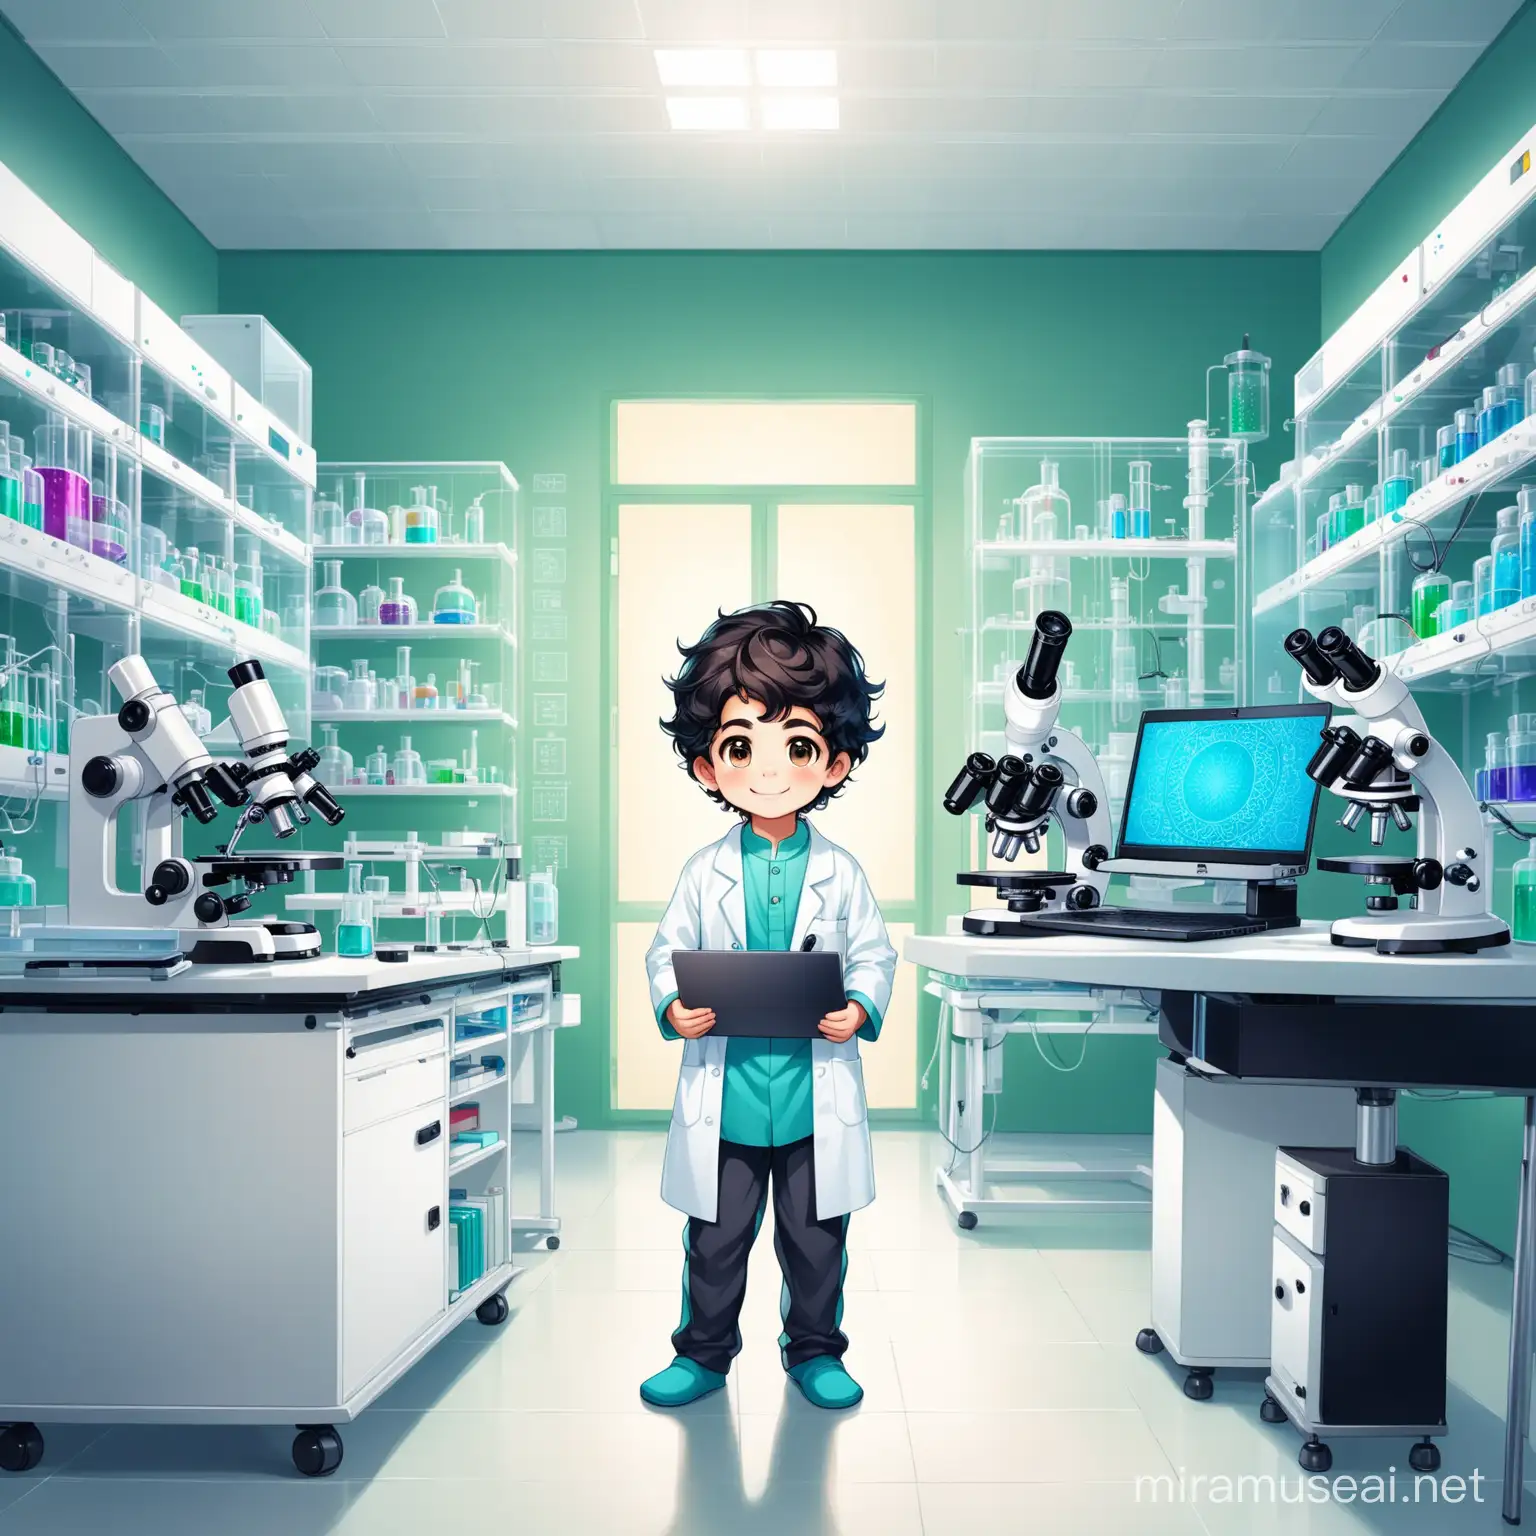 Persian little boy(full height, white skin, cute, smiling, with emphasis clothes are full of Persian designs).
Atmosphere a super modern laboratory with microscope and laptop which is showing cells.